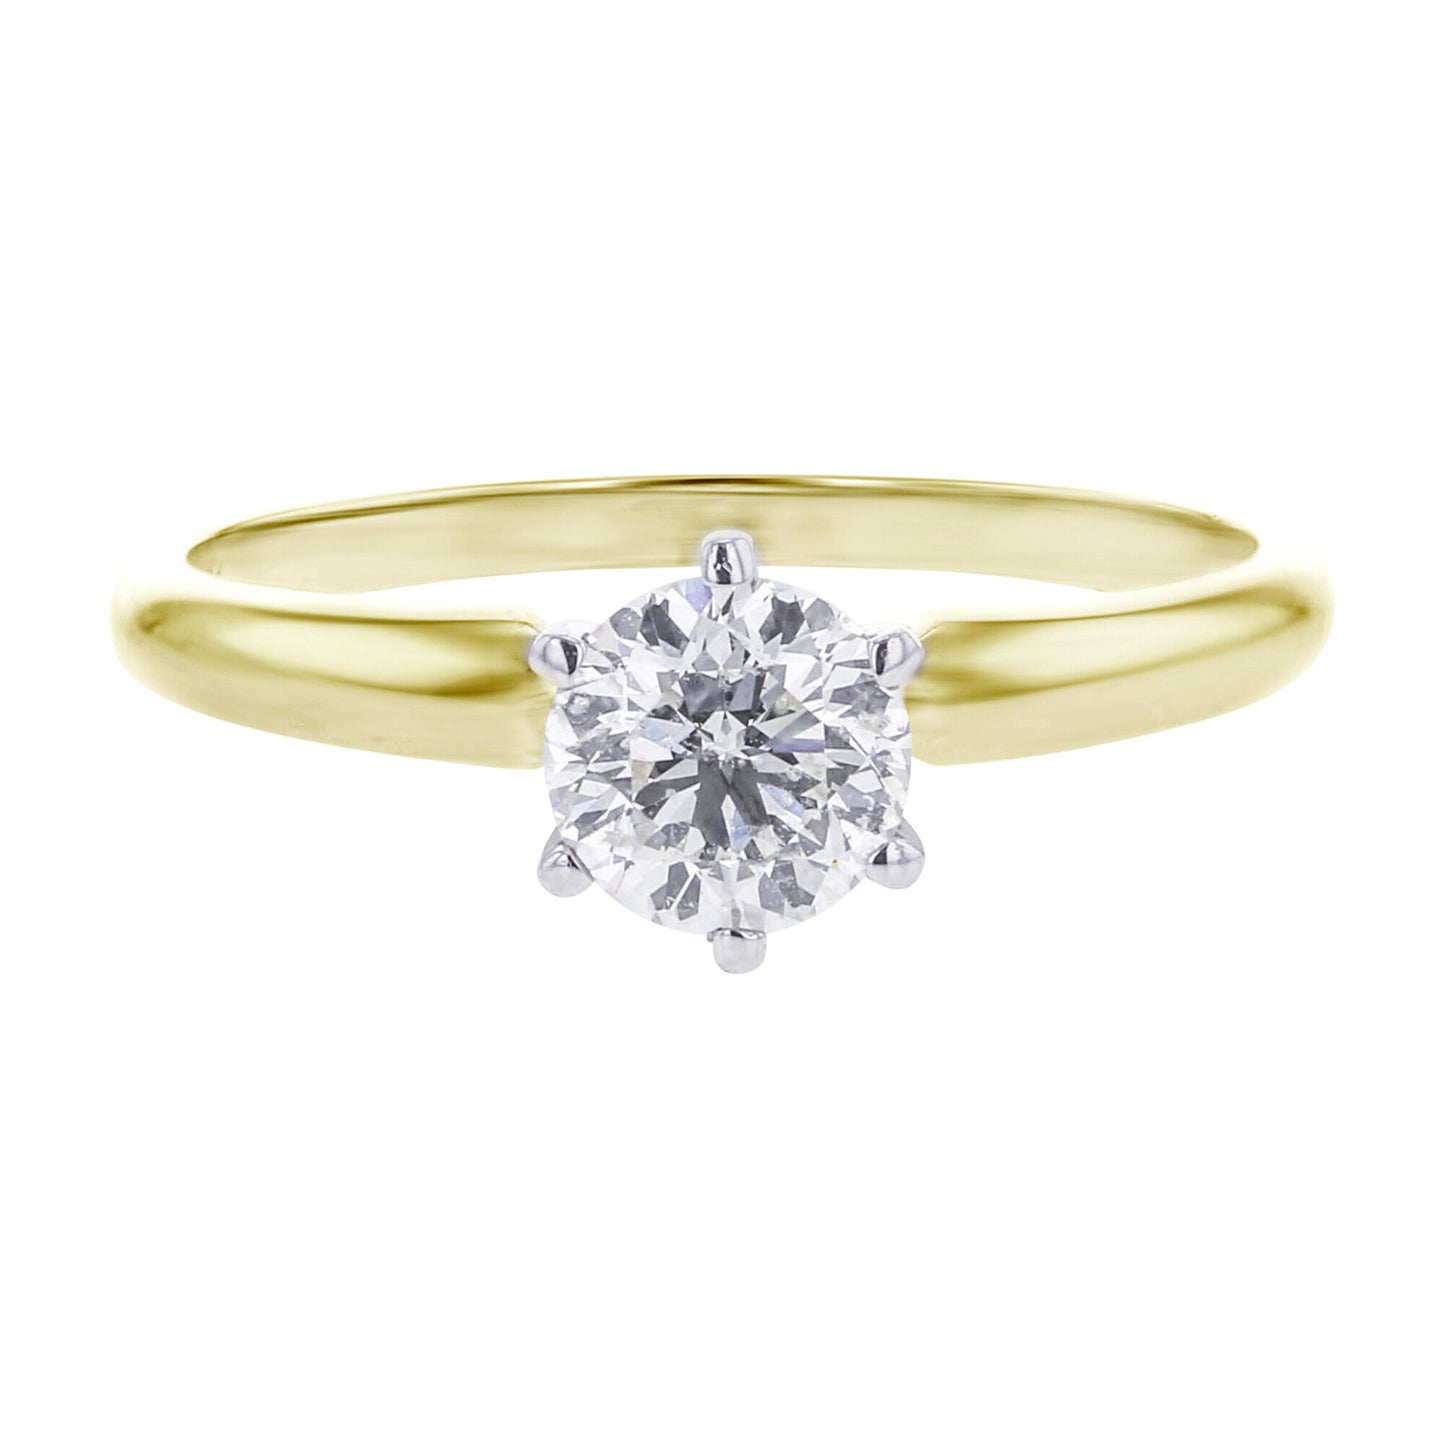 Christa Ready For Love Diamond Engagement Ring 3/4CT